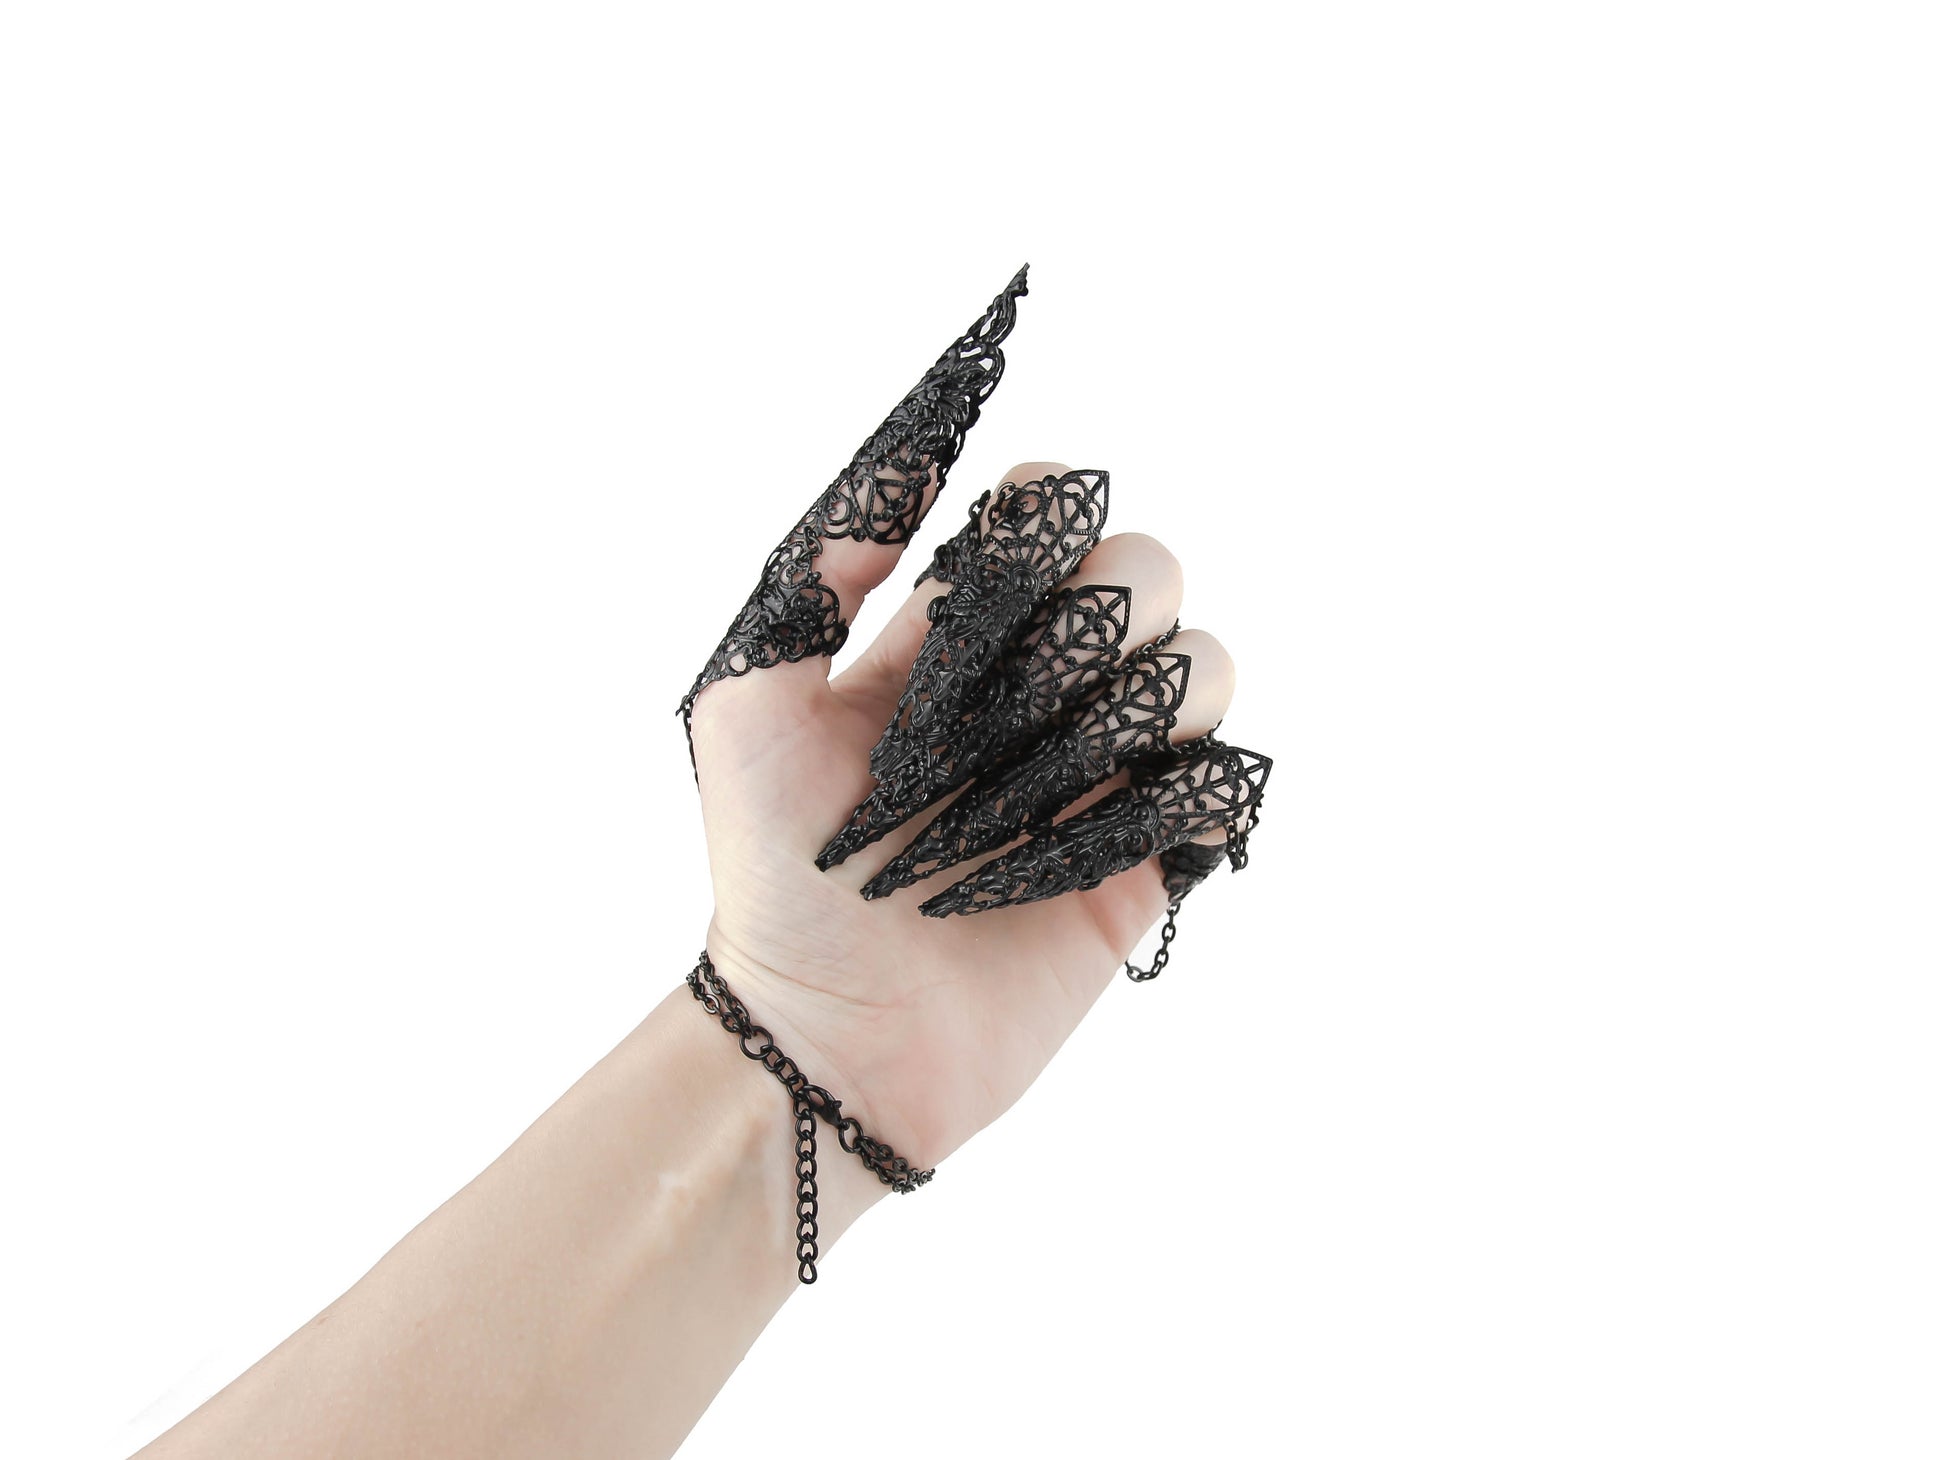 A hand dons a striking goth jewelry piece, the Metal Glove Diablo, with intricate black filigree forming elegant claws, embodying the essence of dark fashion. This statement accessory is perfect for gothic attire, adding a dramatic touch with its ornamental chains and elaborate detailing.